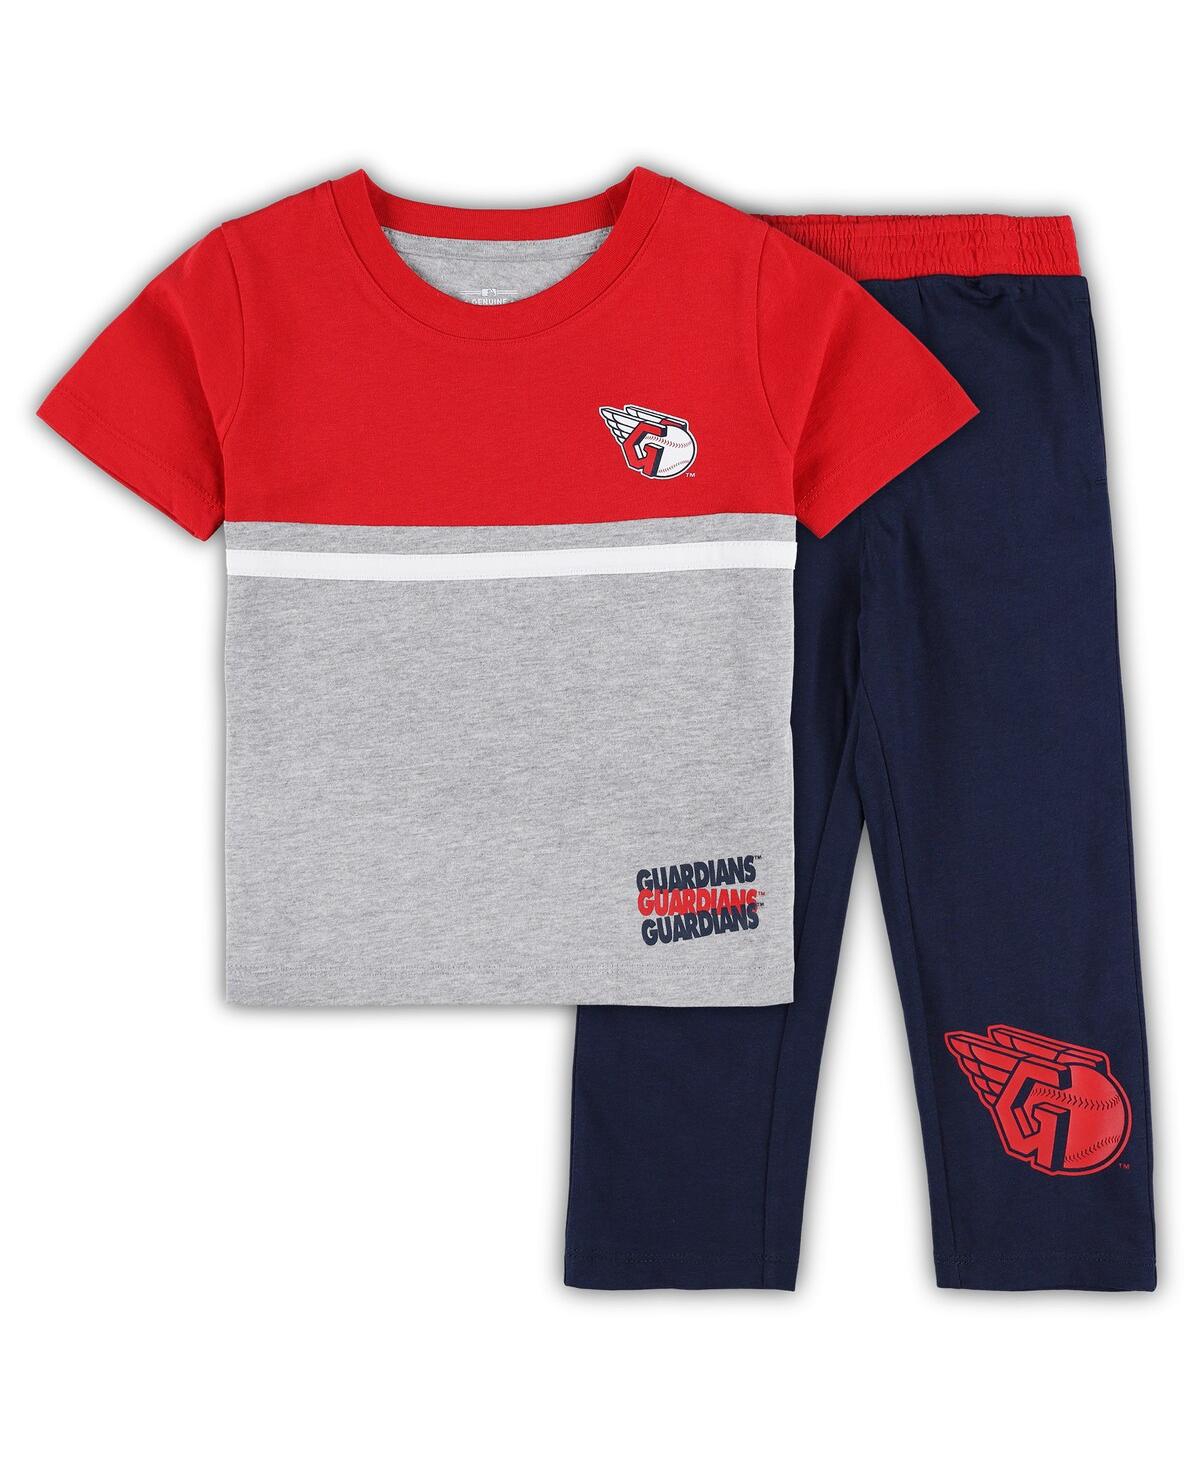 Outerstuff Babies' Toddler Boys And Girls Navy, Red Cleveland Guardians Batters Box T-shirt And Pants Set In Navy,red